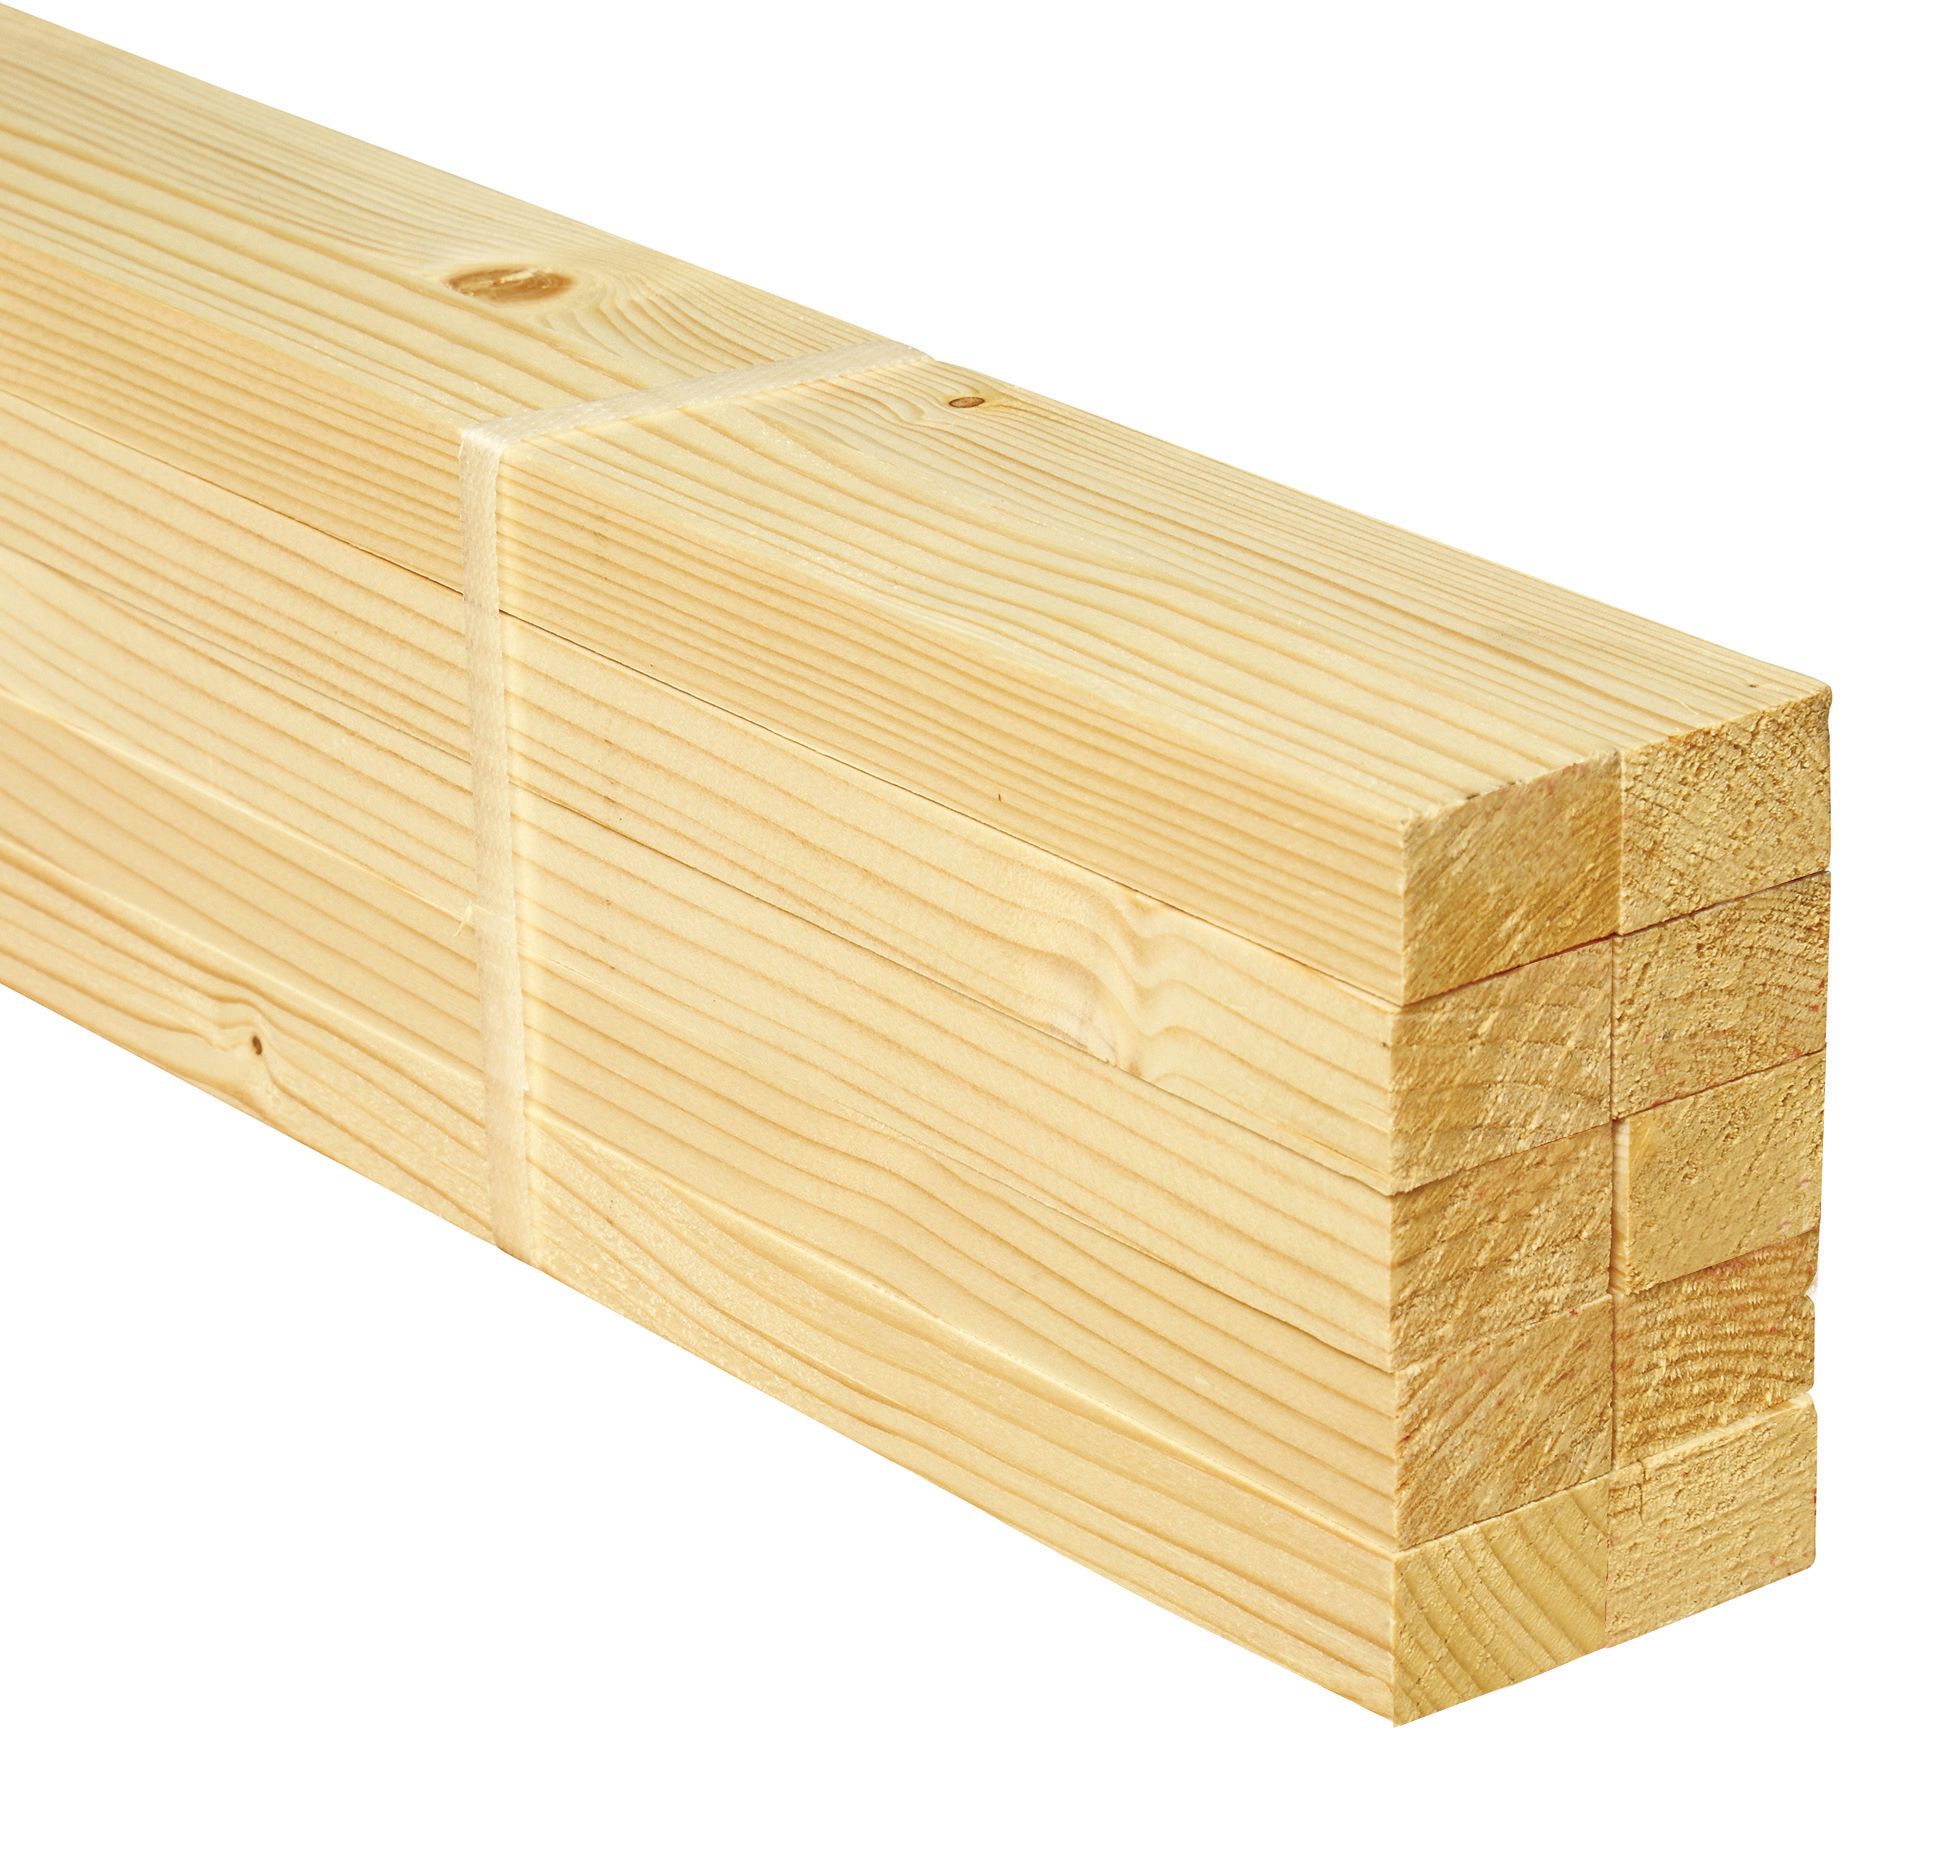 Image of Wickes Whitewood PSE Timber - 18 x 28 x 1800mm - Pack of 10